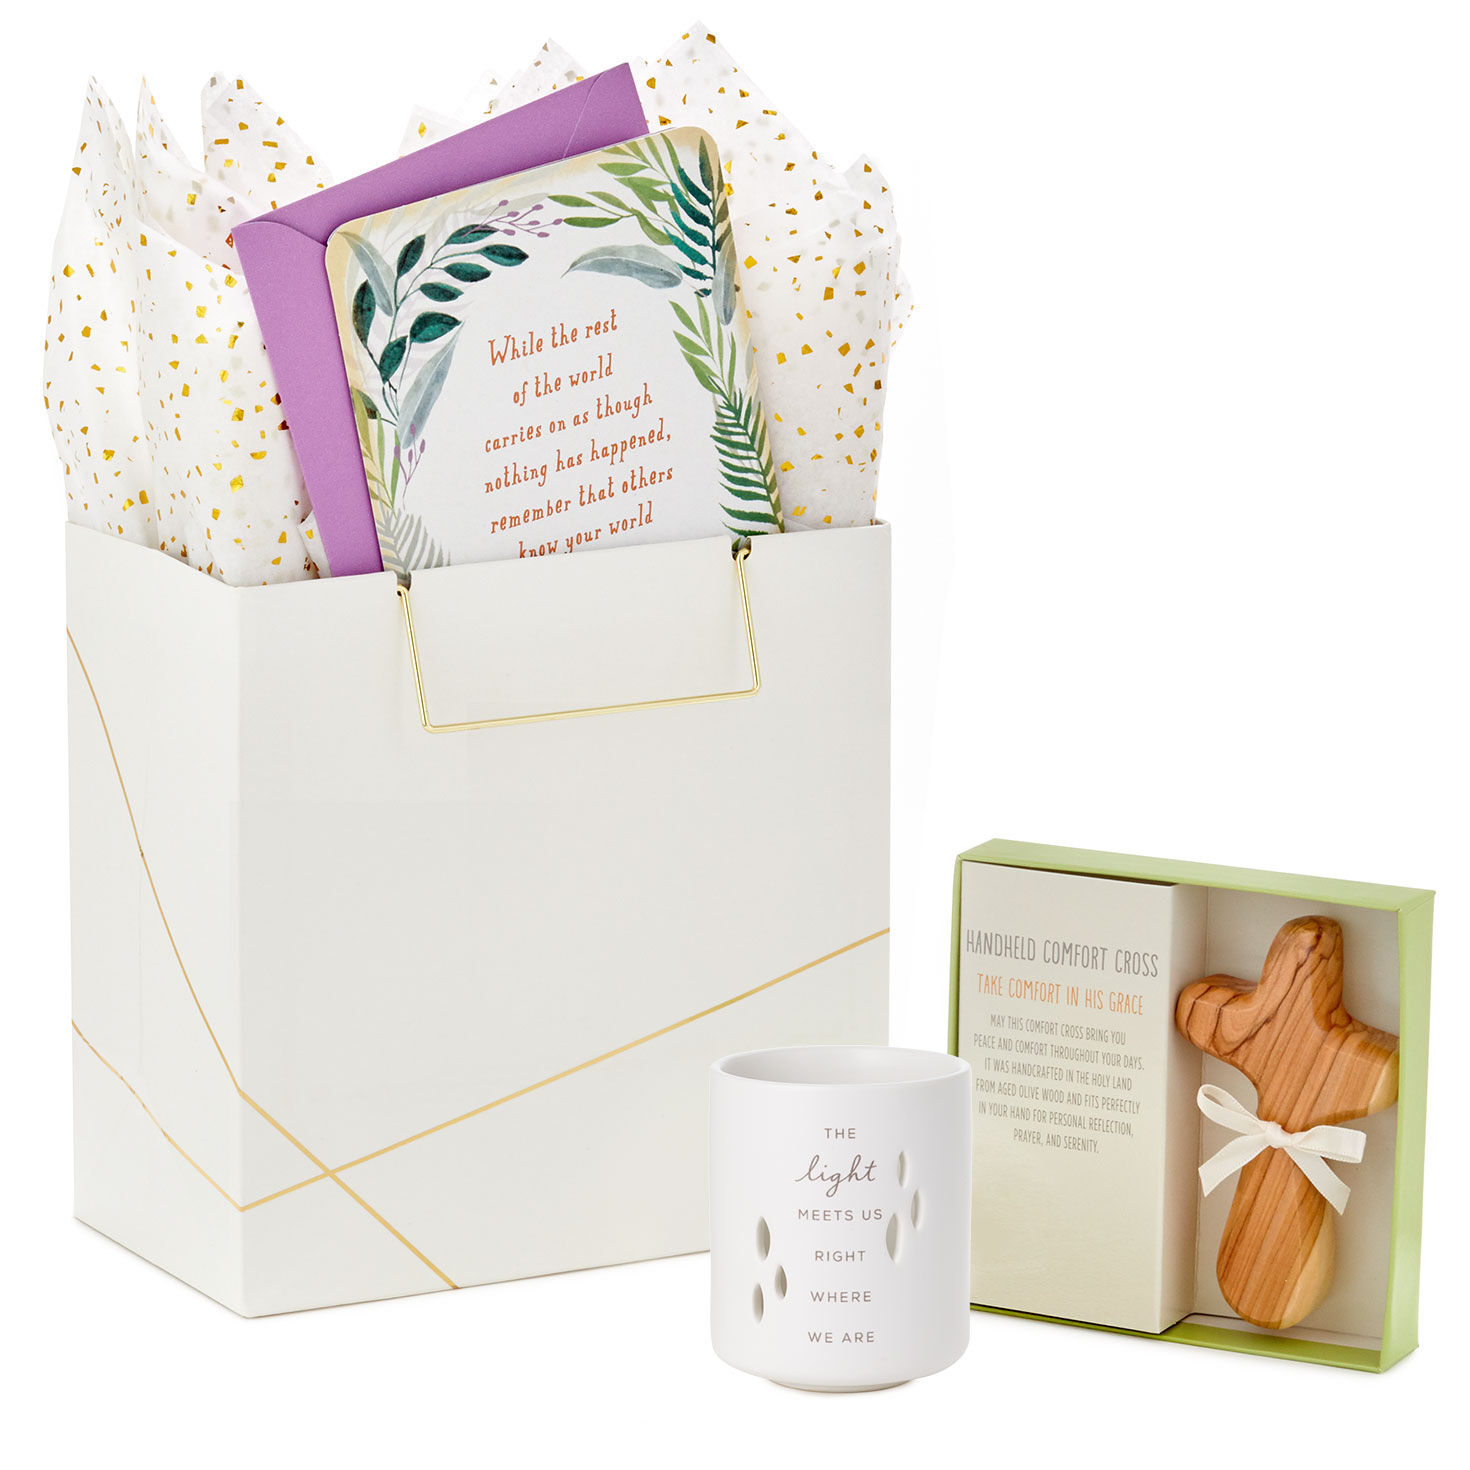 Faith and Healing Sympathy Gift Set for only USD 2.49-22.99 | Hallmark